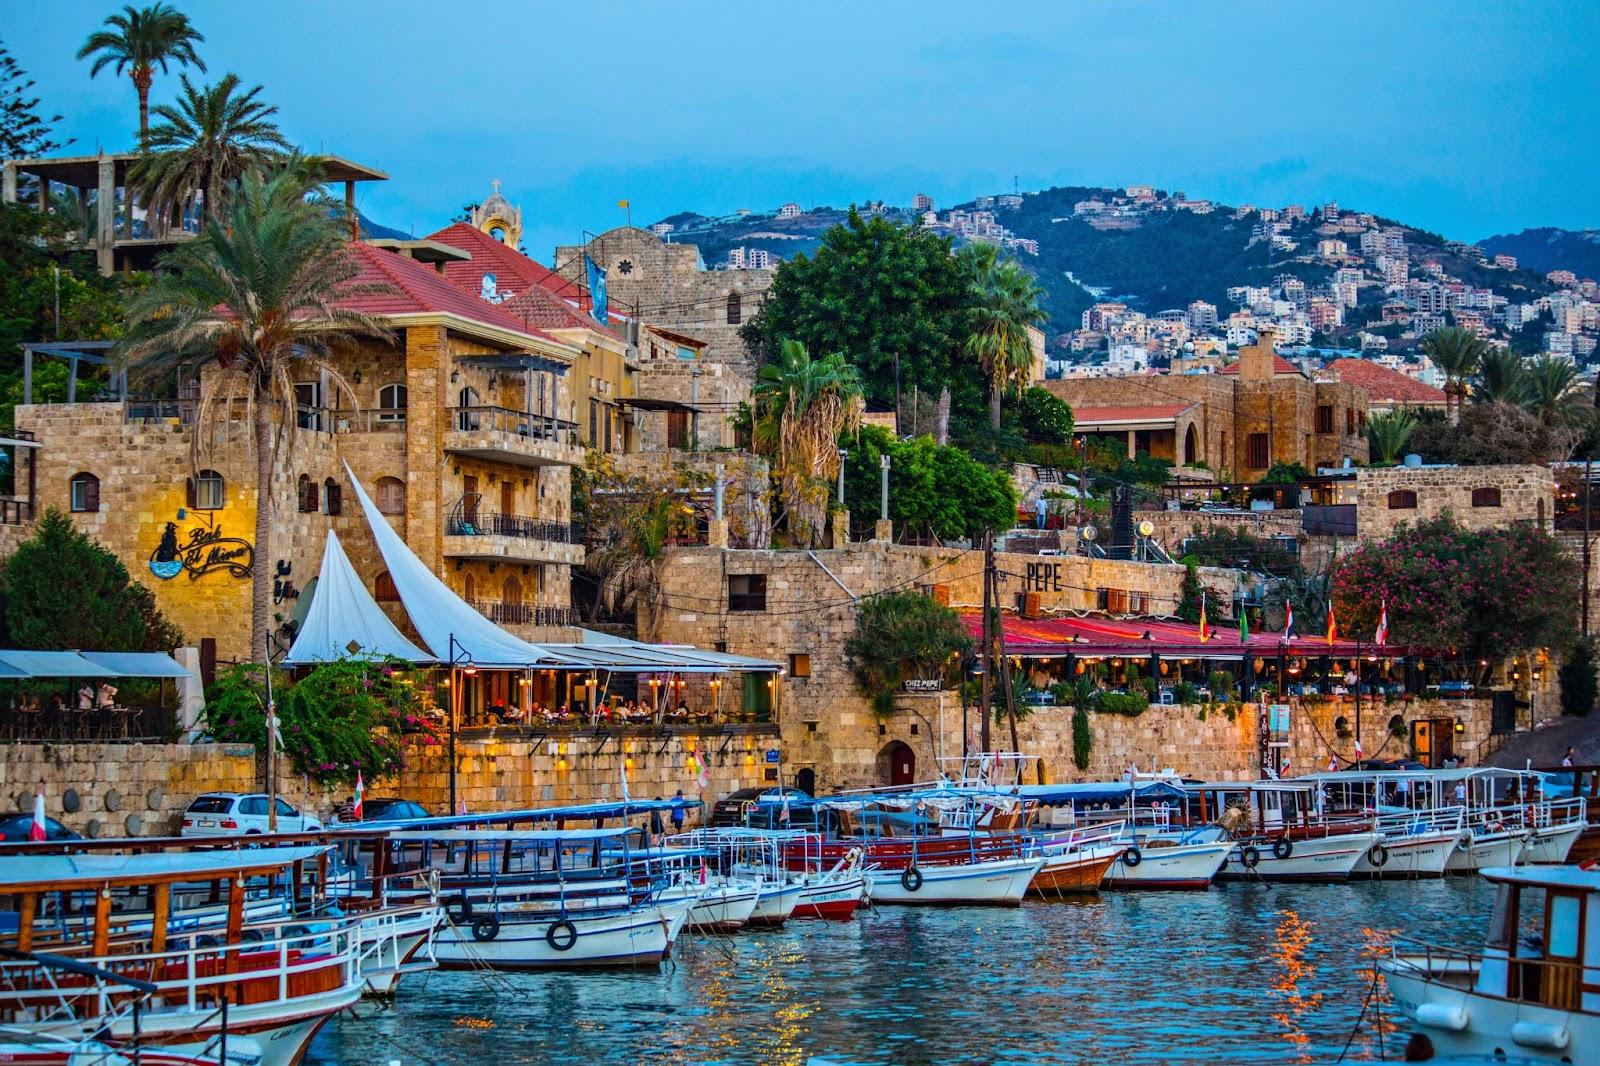 Historical houses and boats in the old port of Byblos, Lebanon